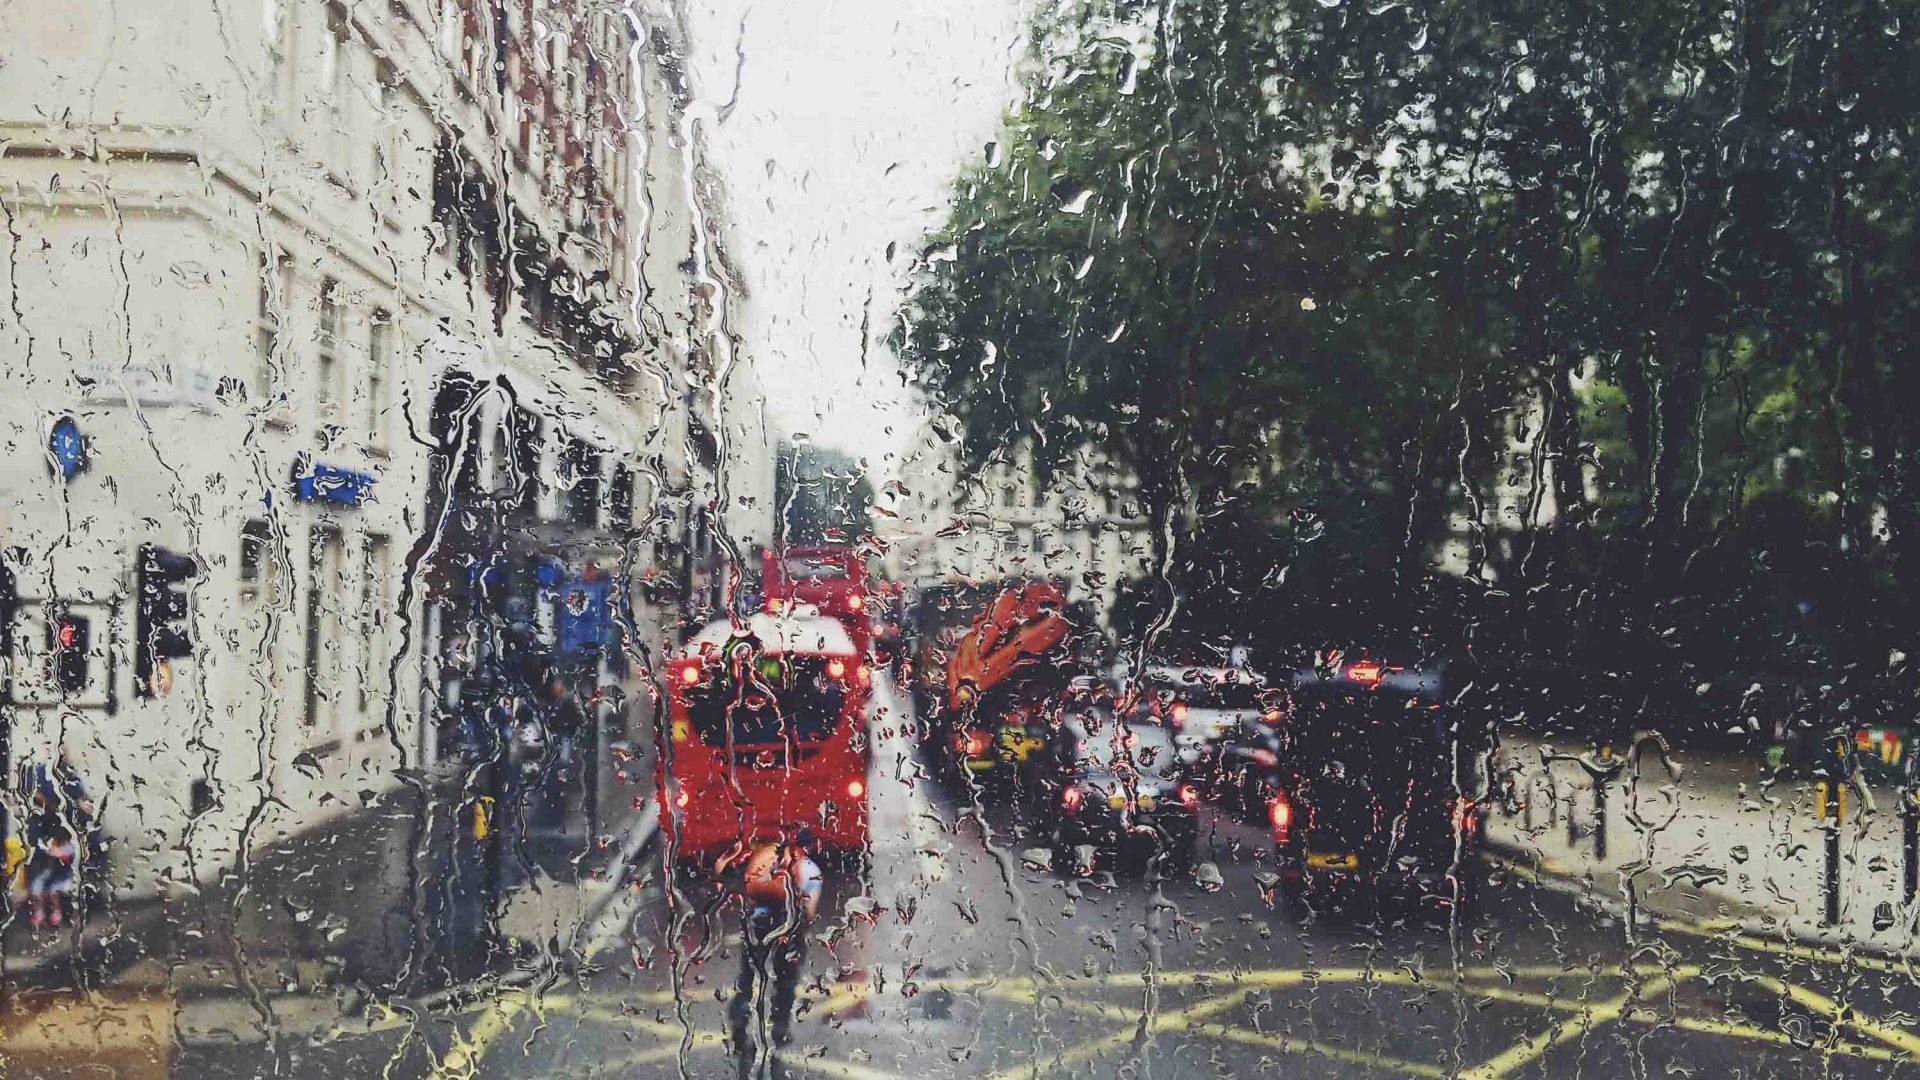 Double decker red buses are seen in the street through a wet rainy window.